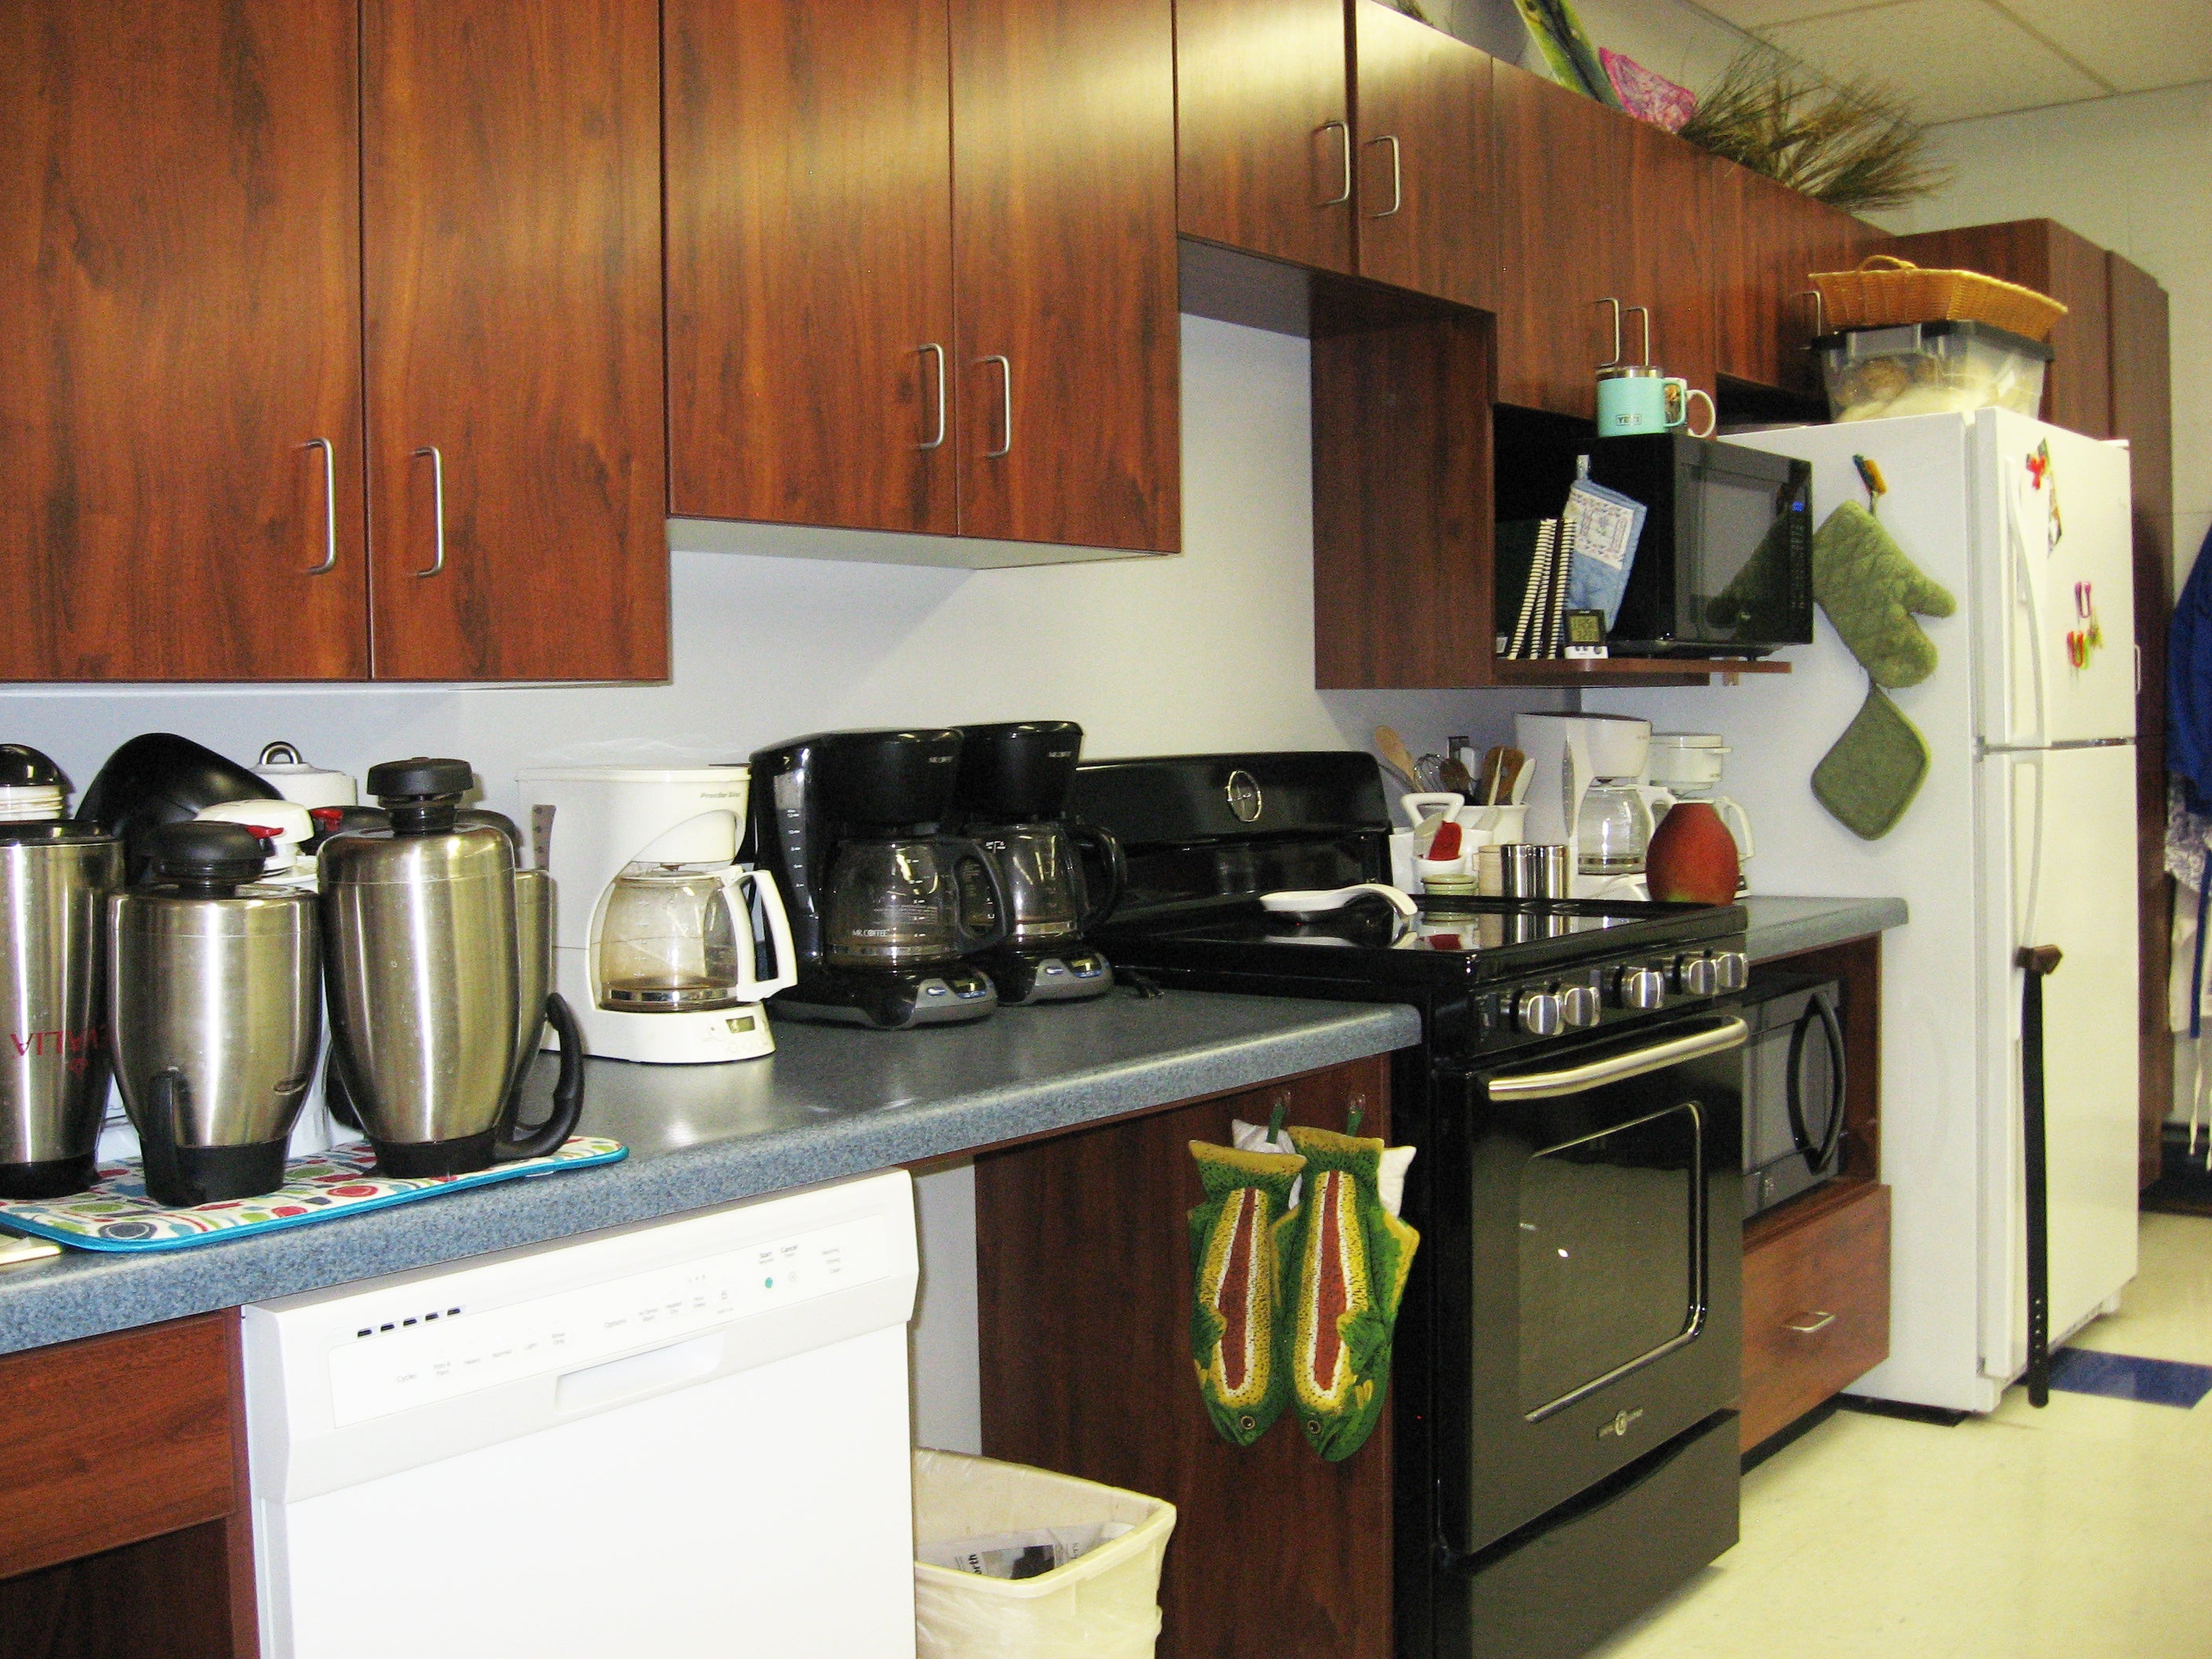 School student kitchen with oll under sink and reach stove controls